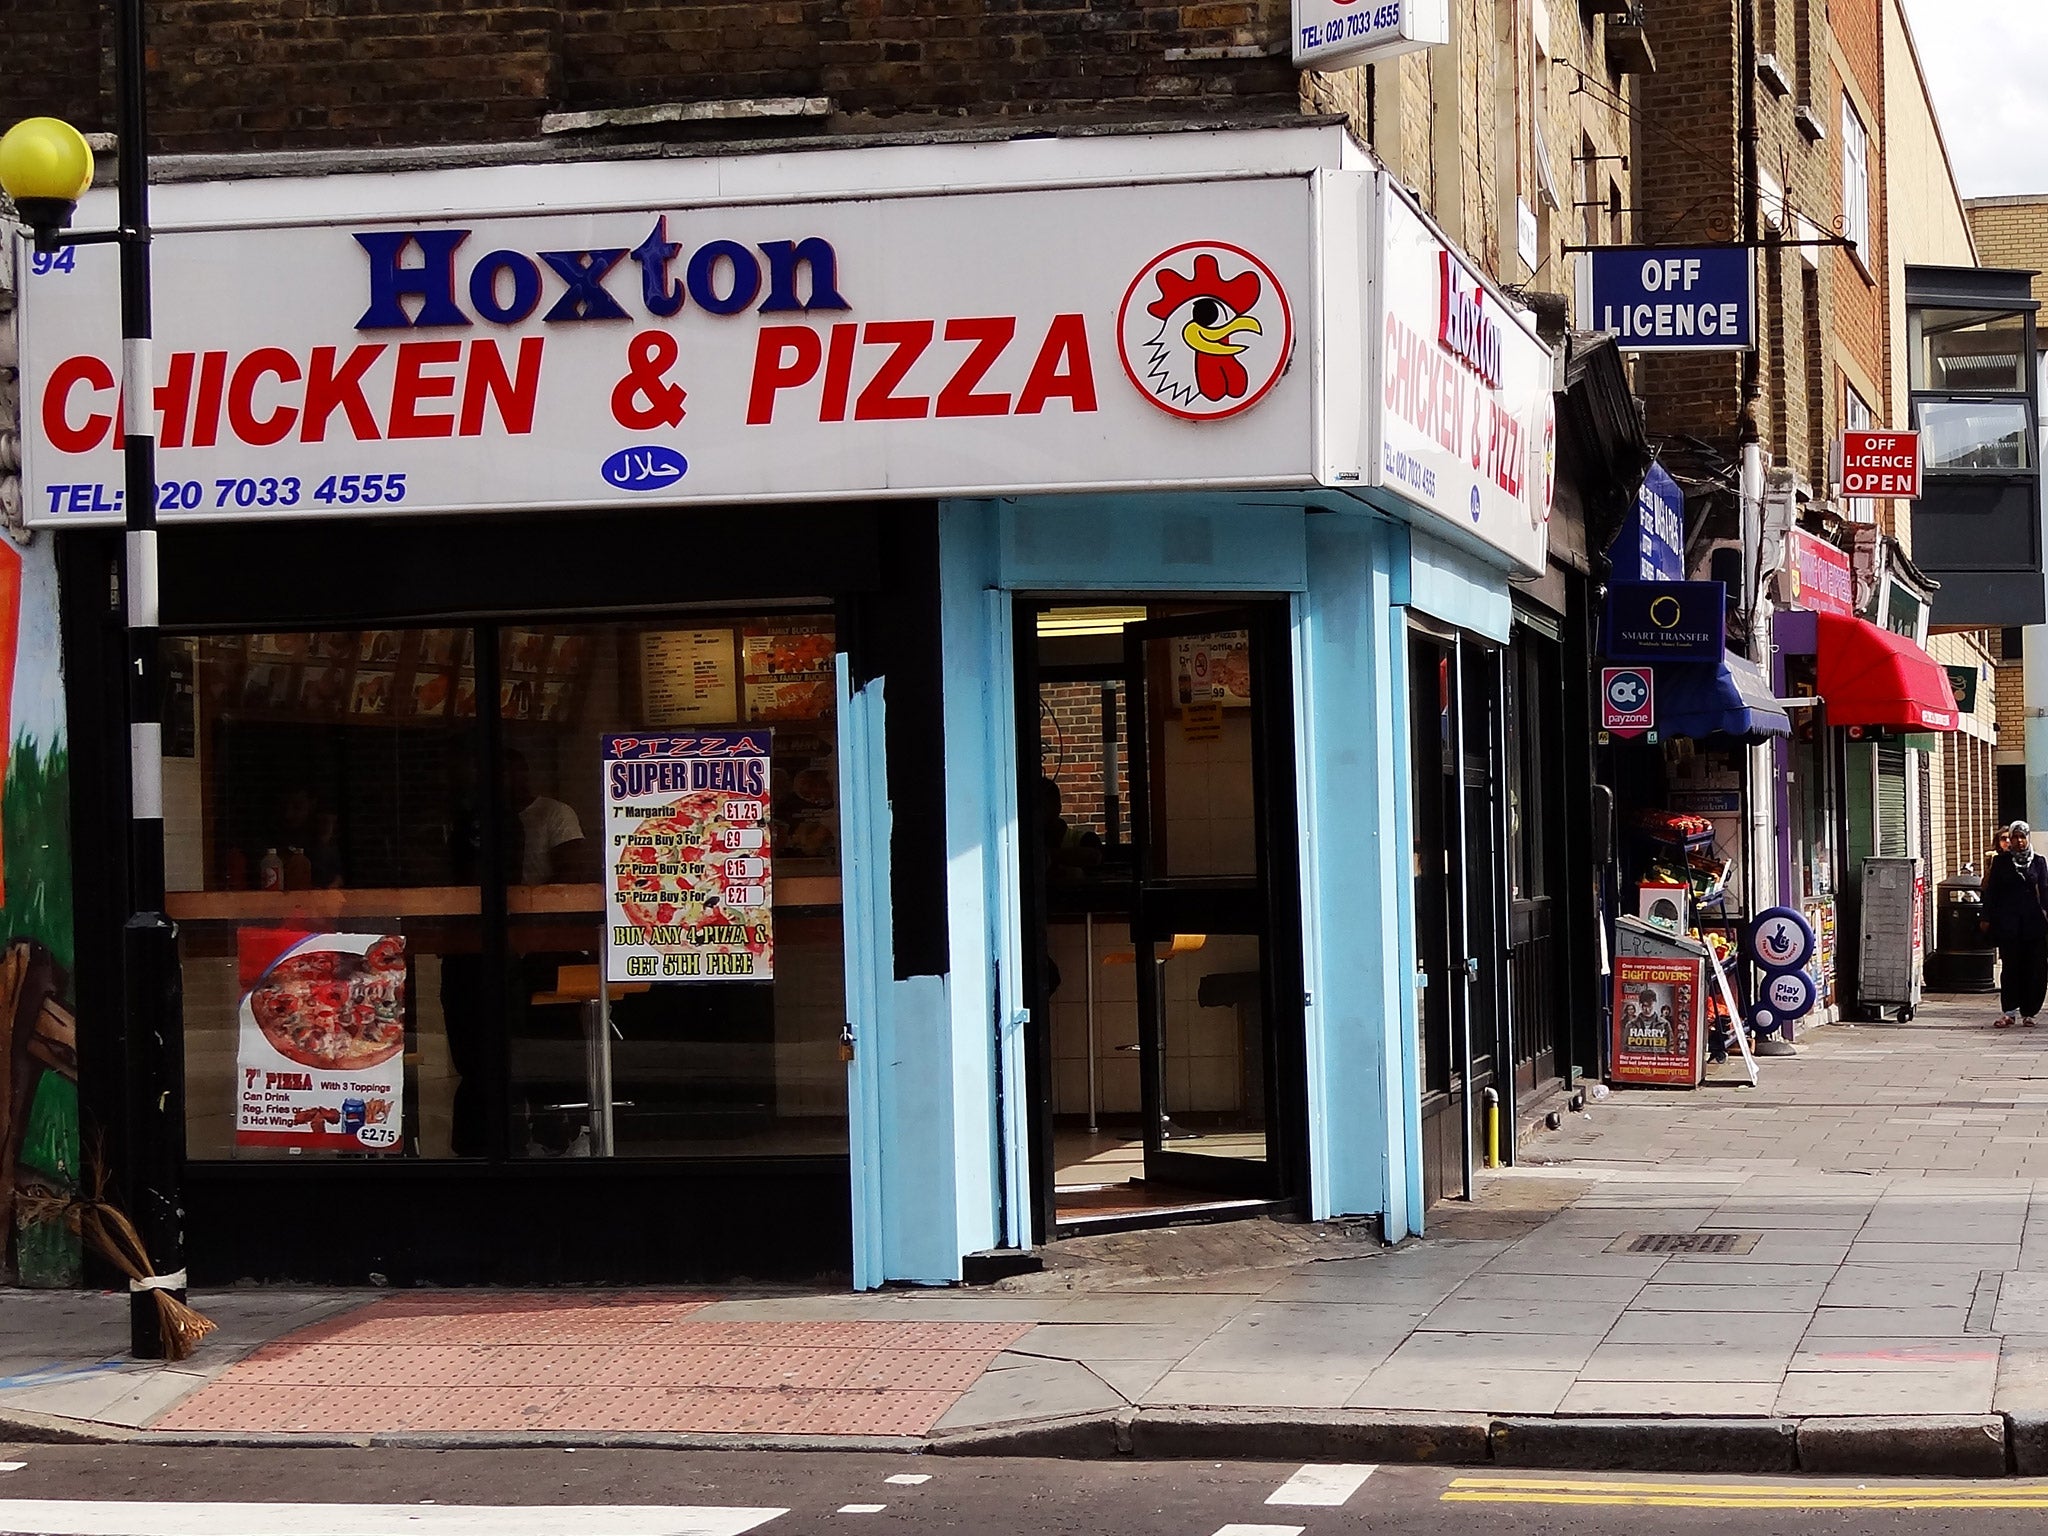 Hoxton Chicken and Pizza in Shoreditch has been the location for two violent attacks on children in the last five years